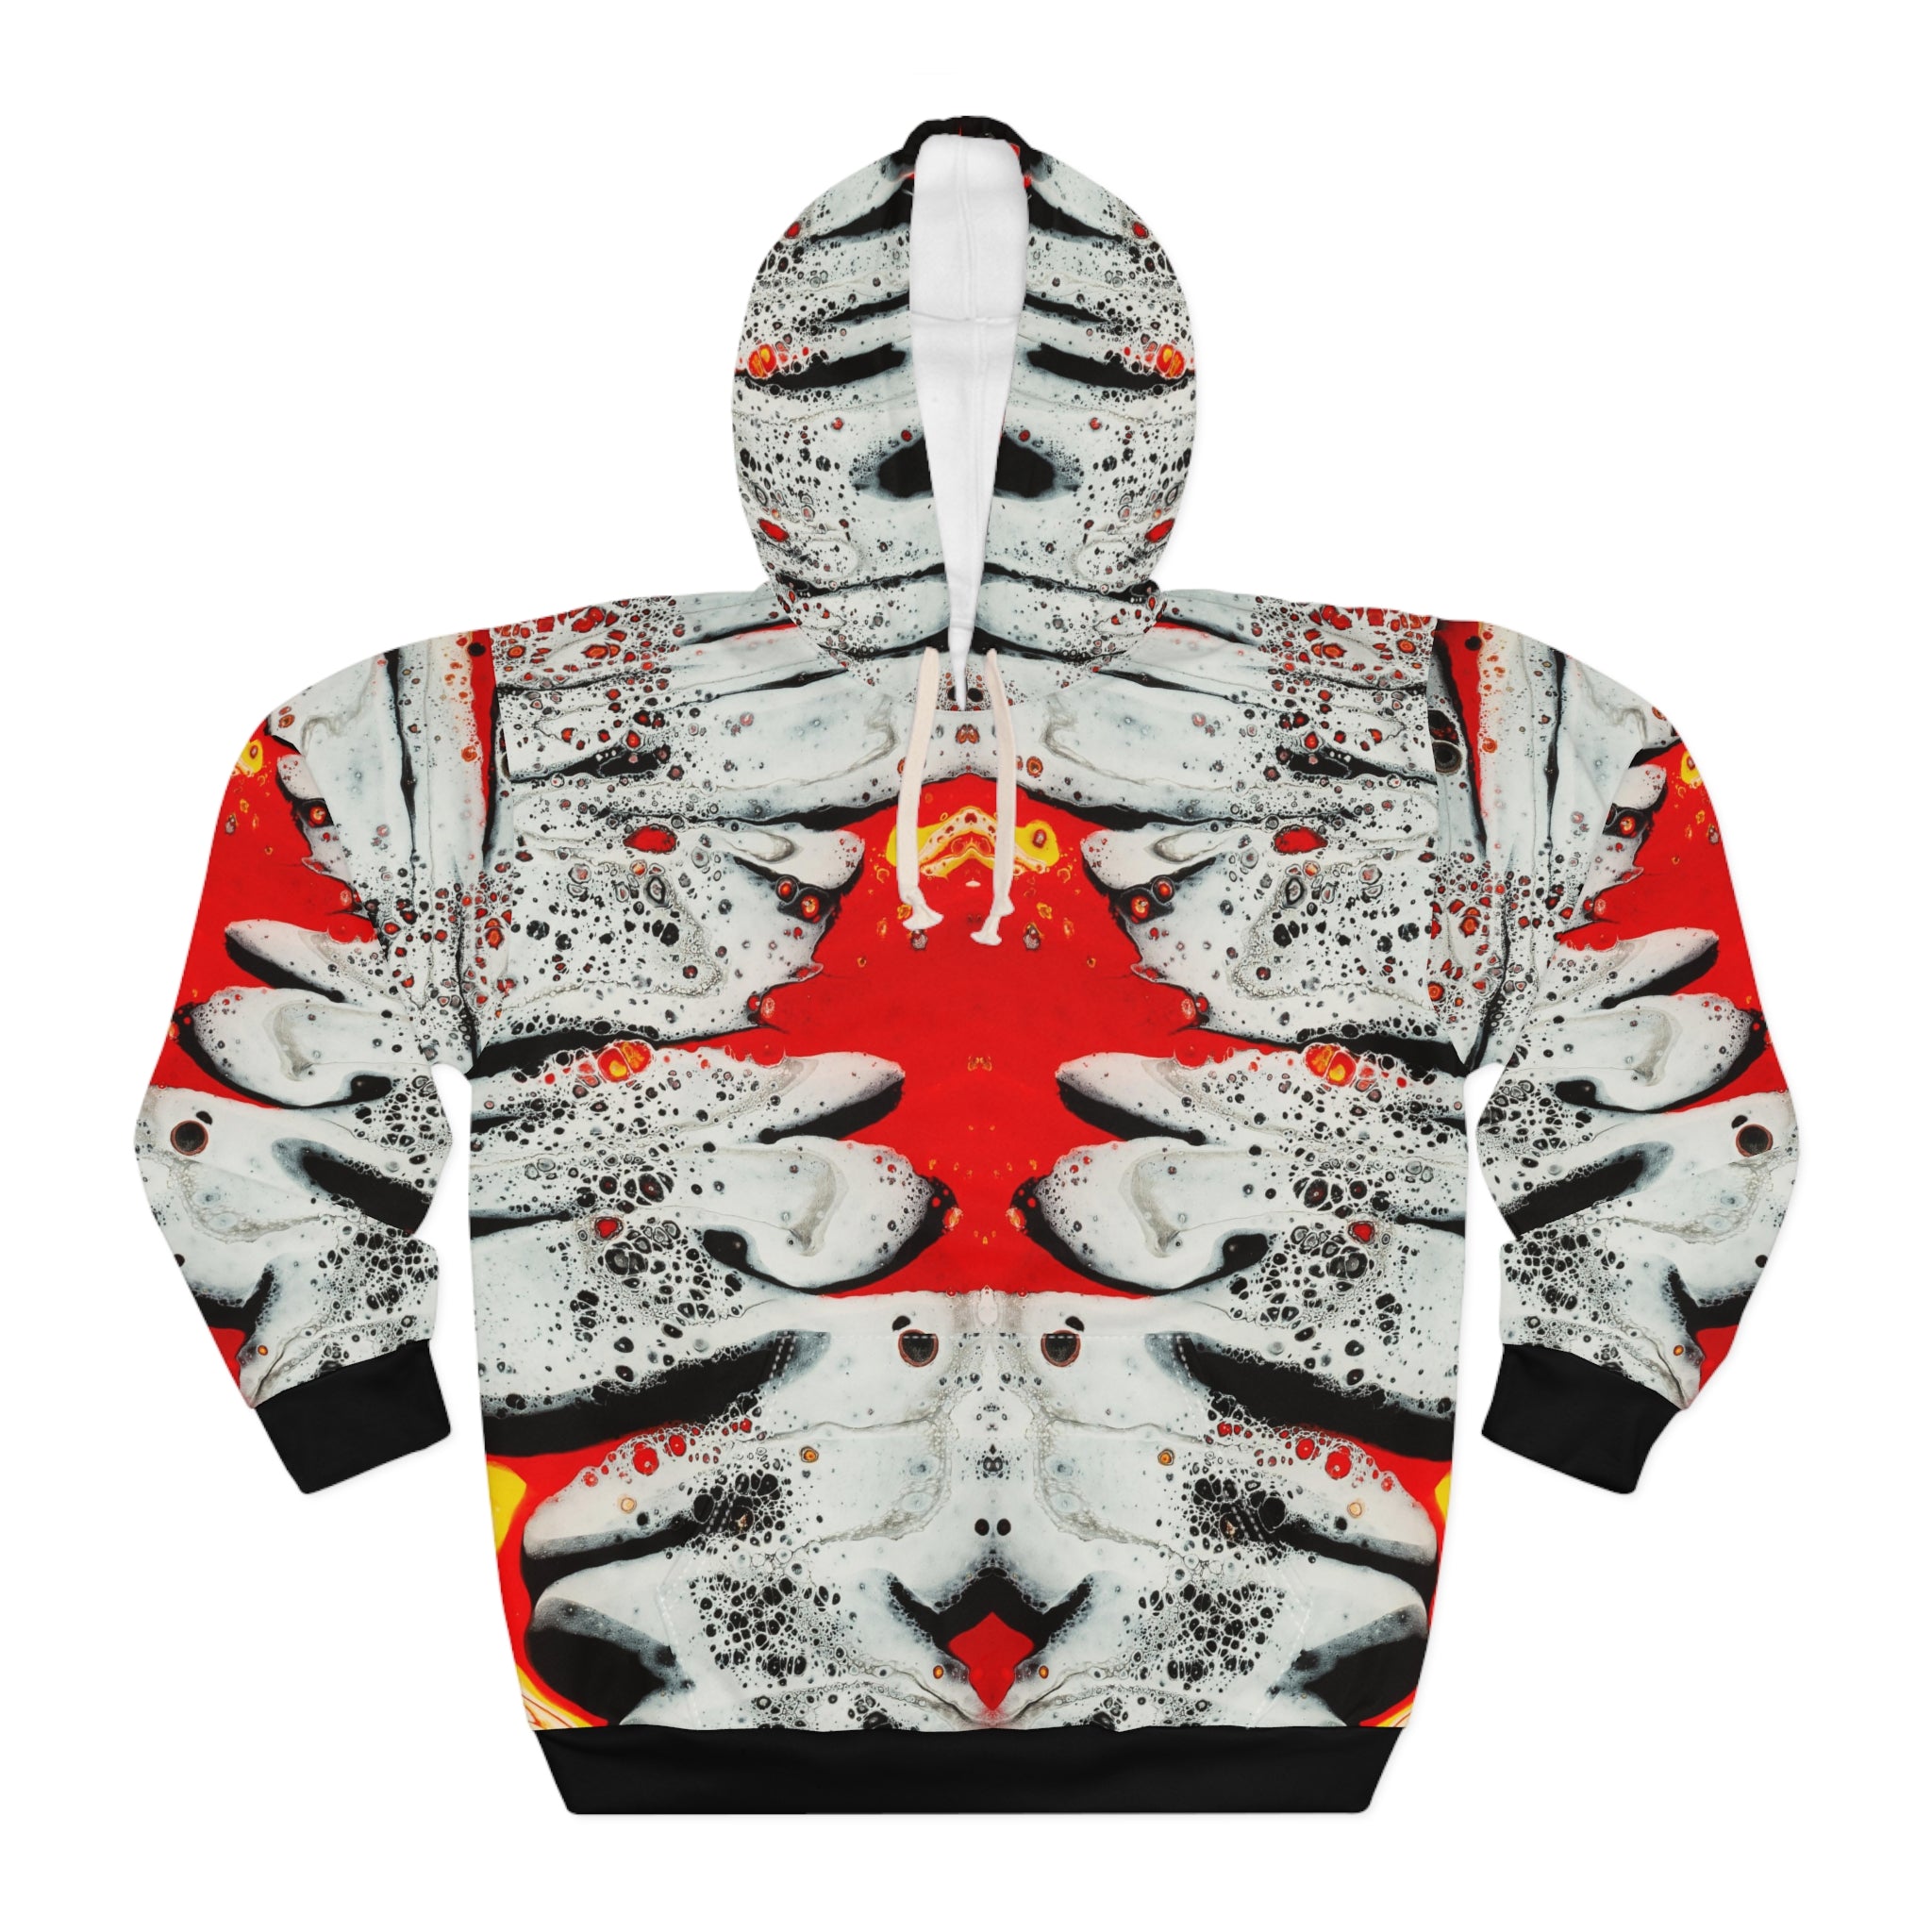 Cameron Creations - Galactic Graffiti - Pullover Hoodie - Front